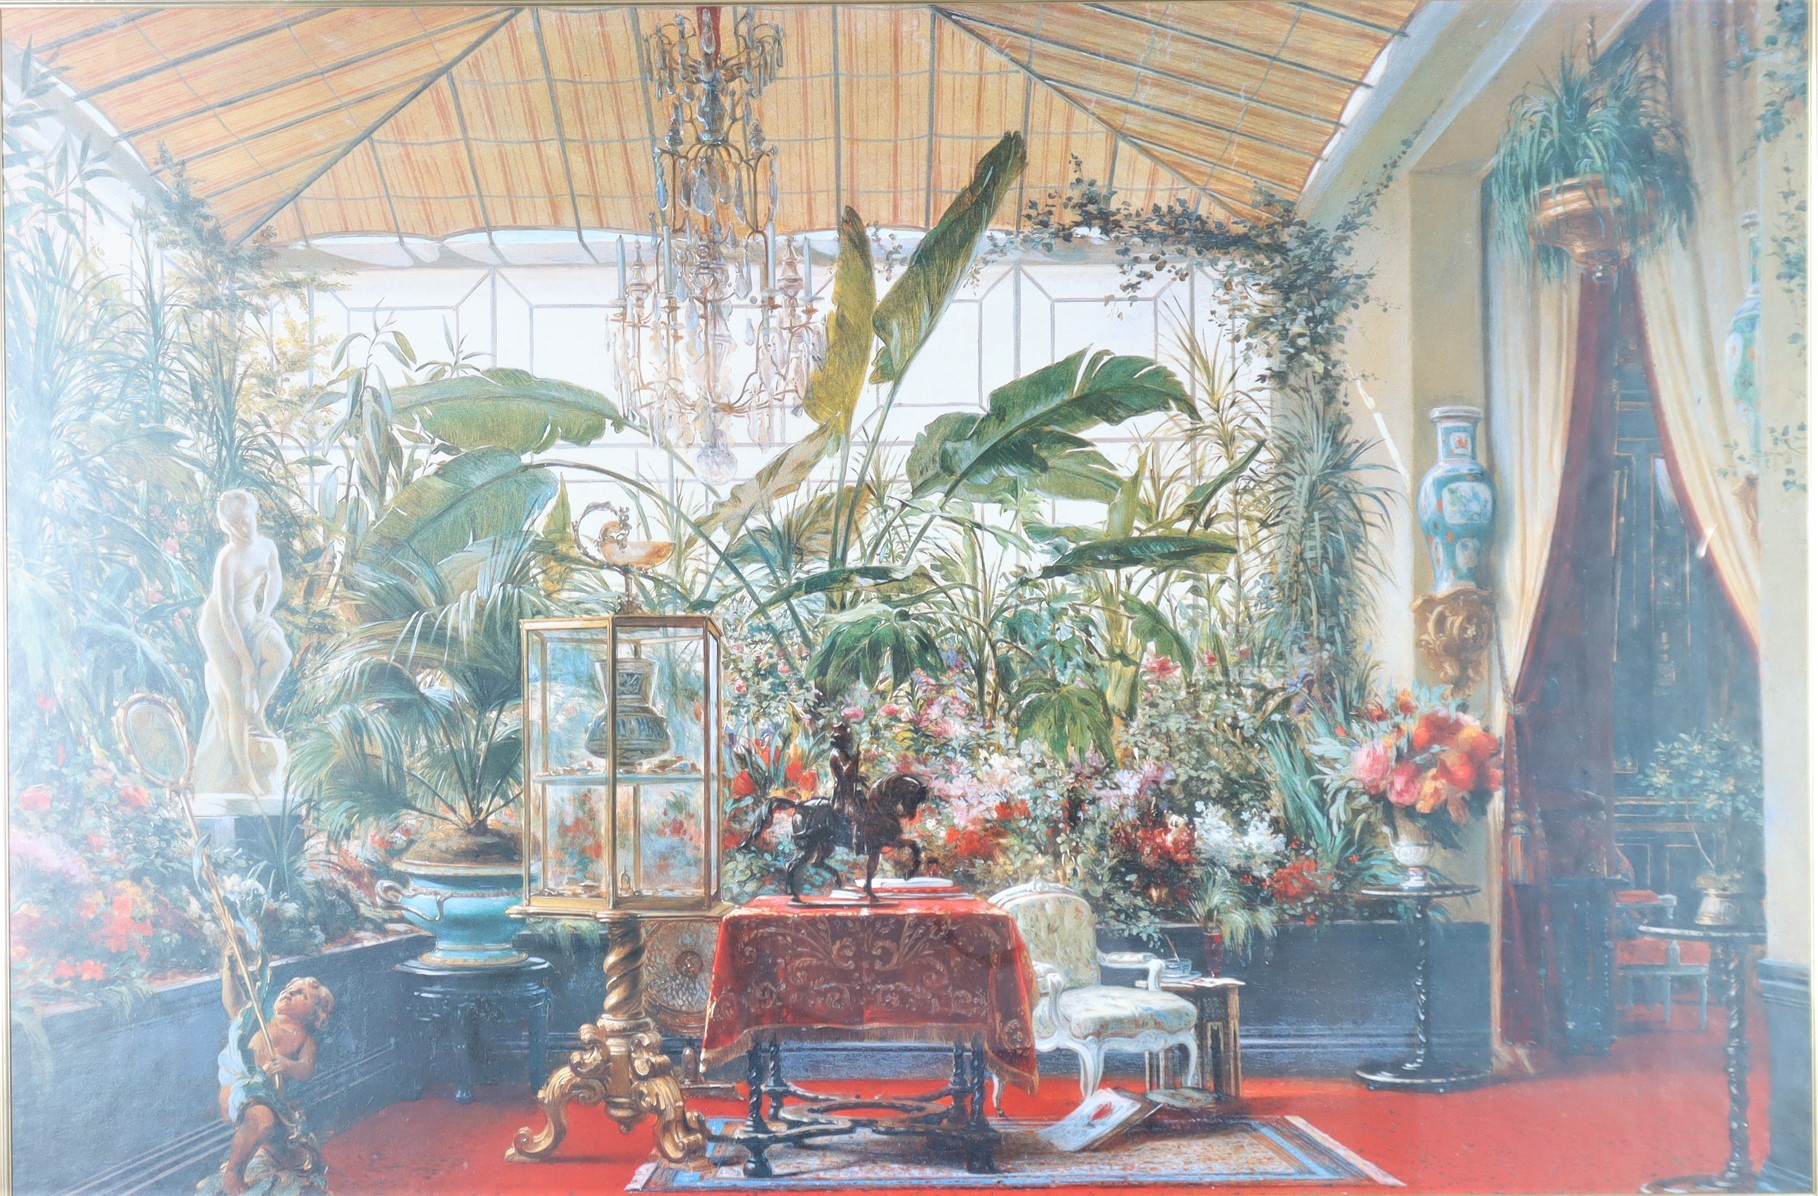 Large Victorian Conservatory Print - Image 3 of 5